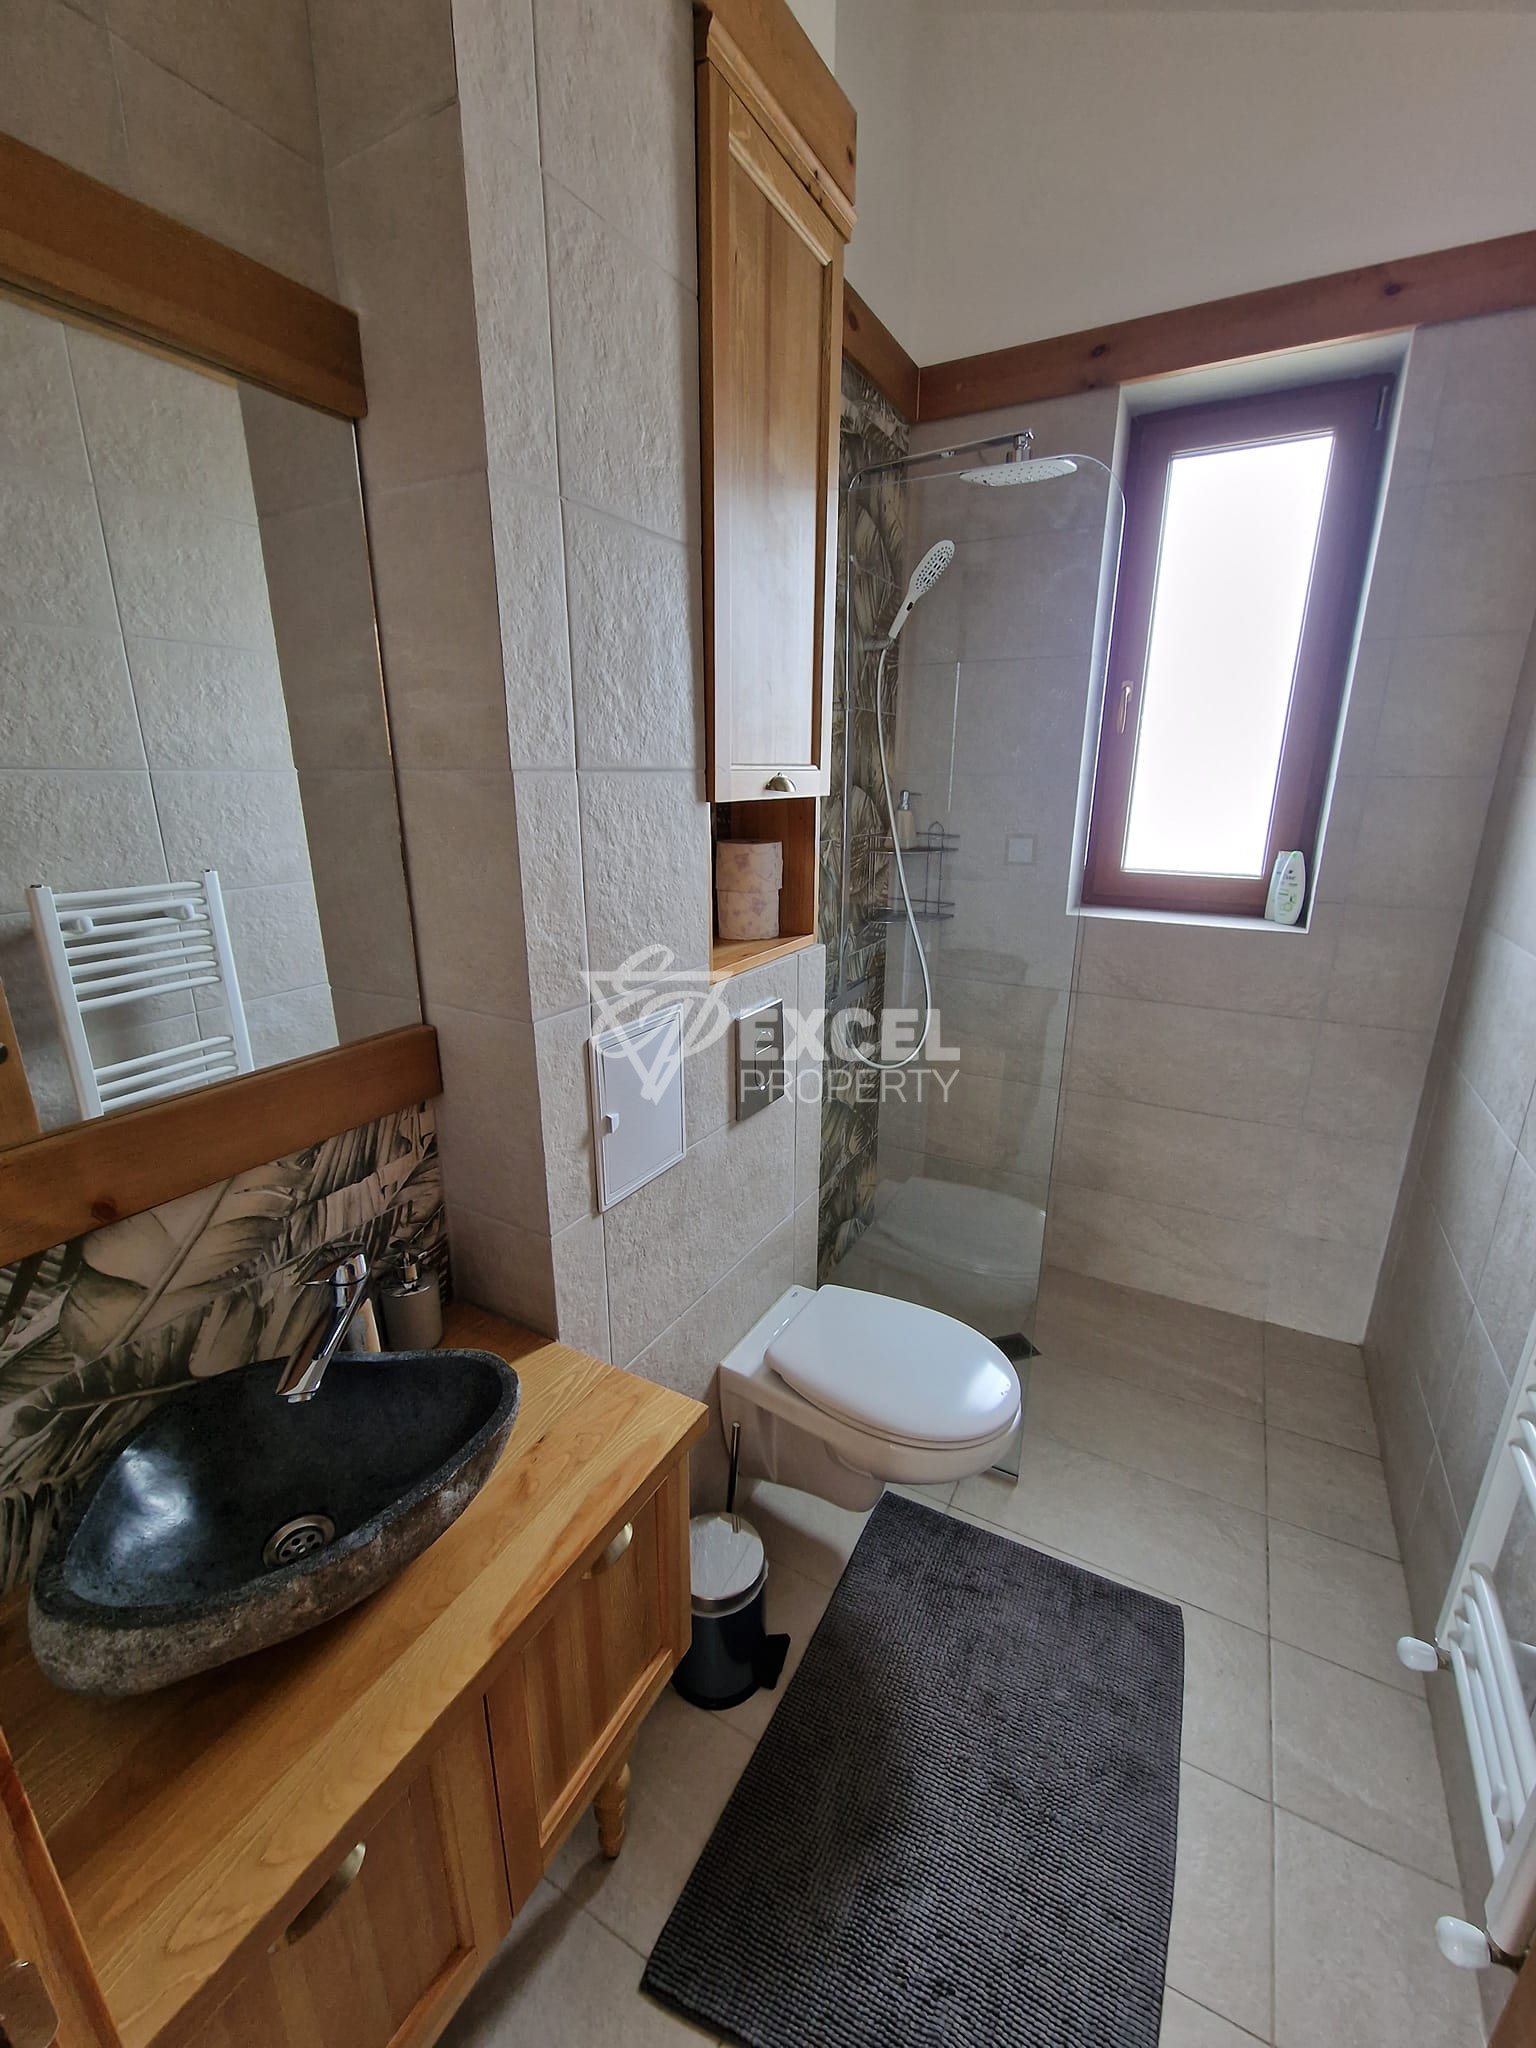 Alpine style house with three bedrooms and a large garden next to Pirin Golf, Pirin Mountain